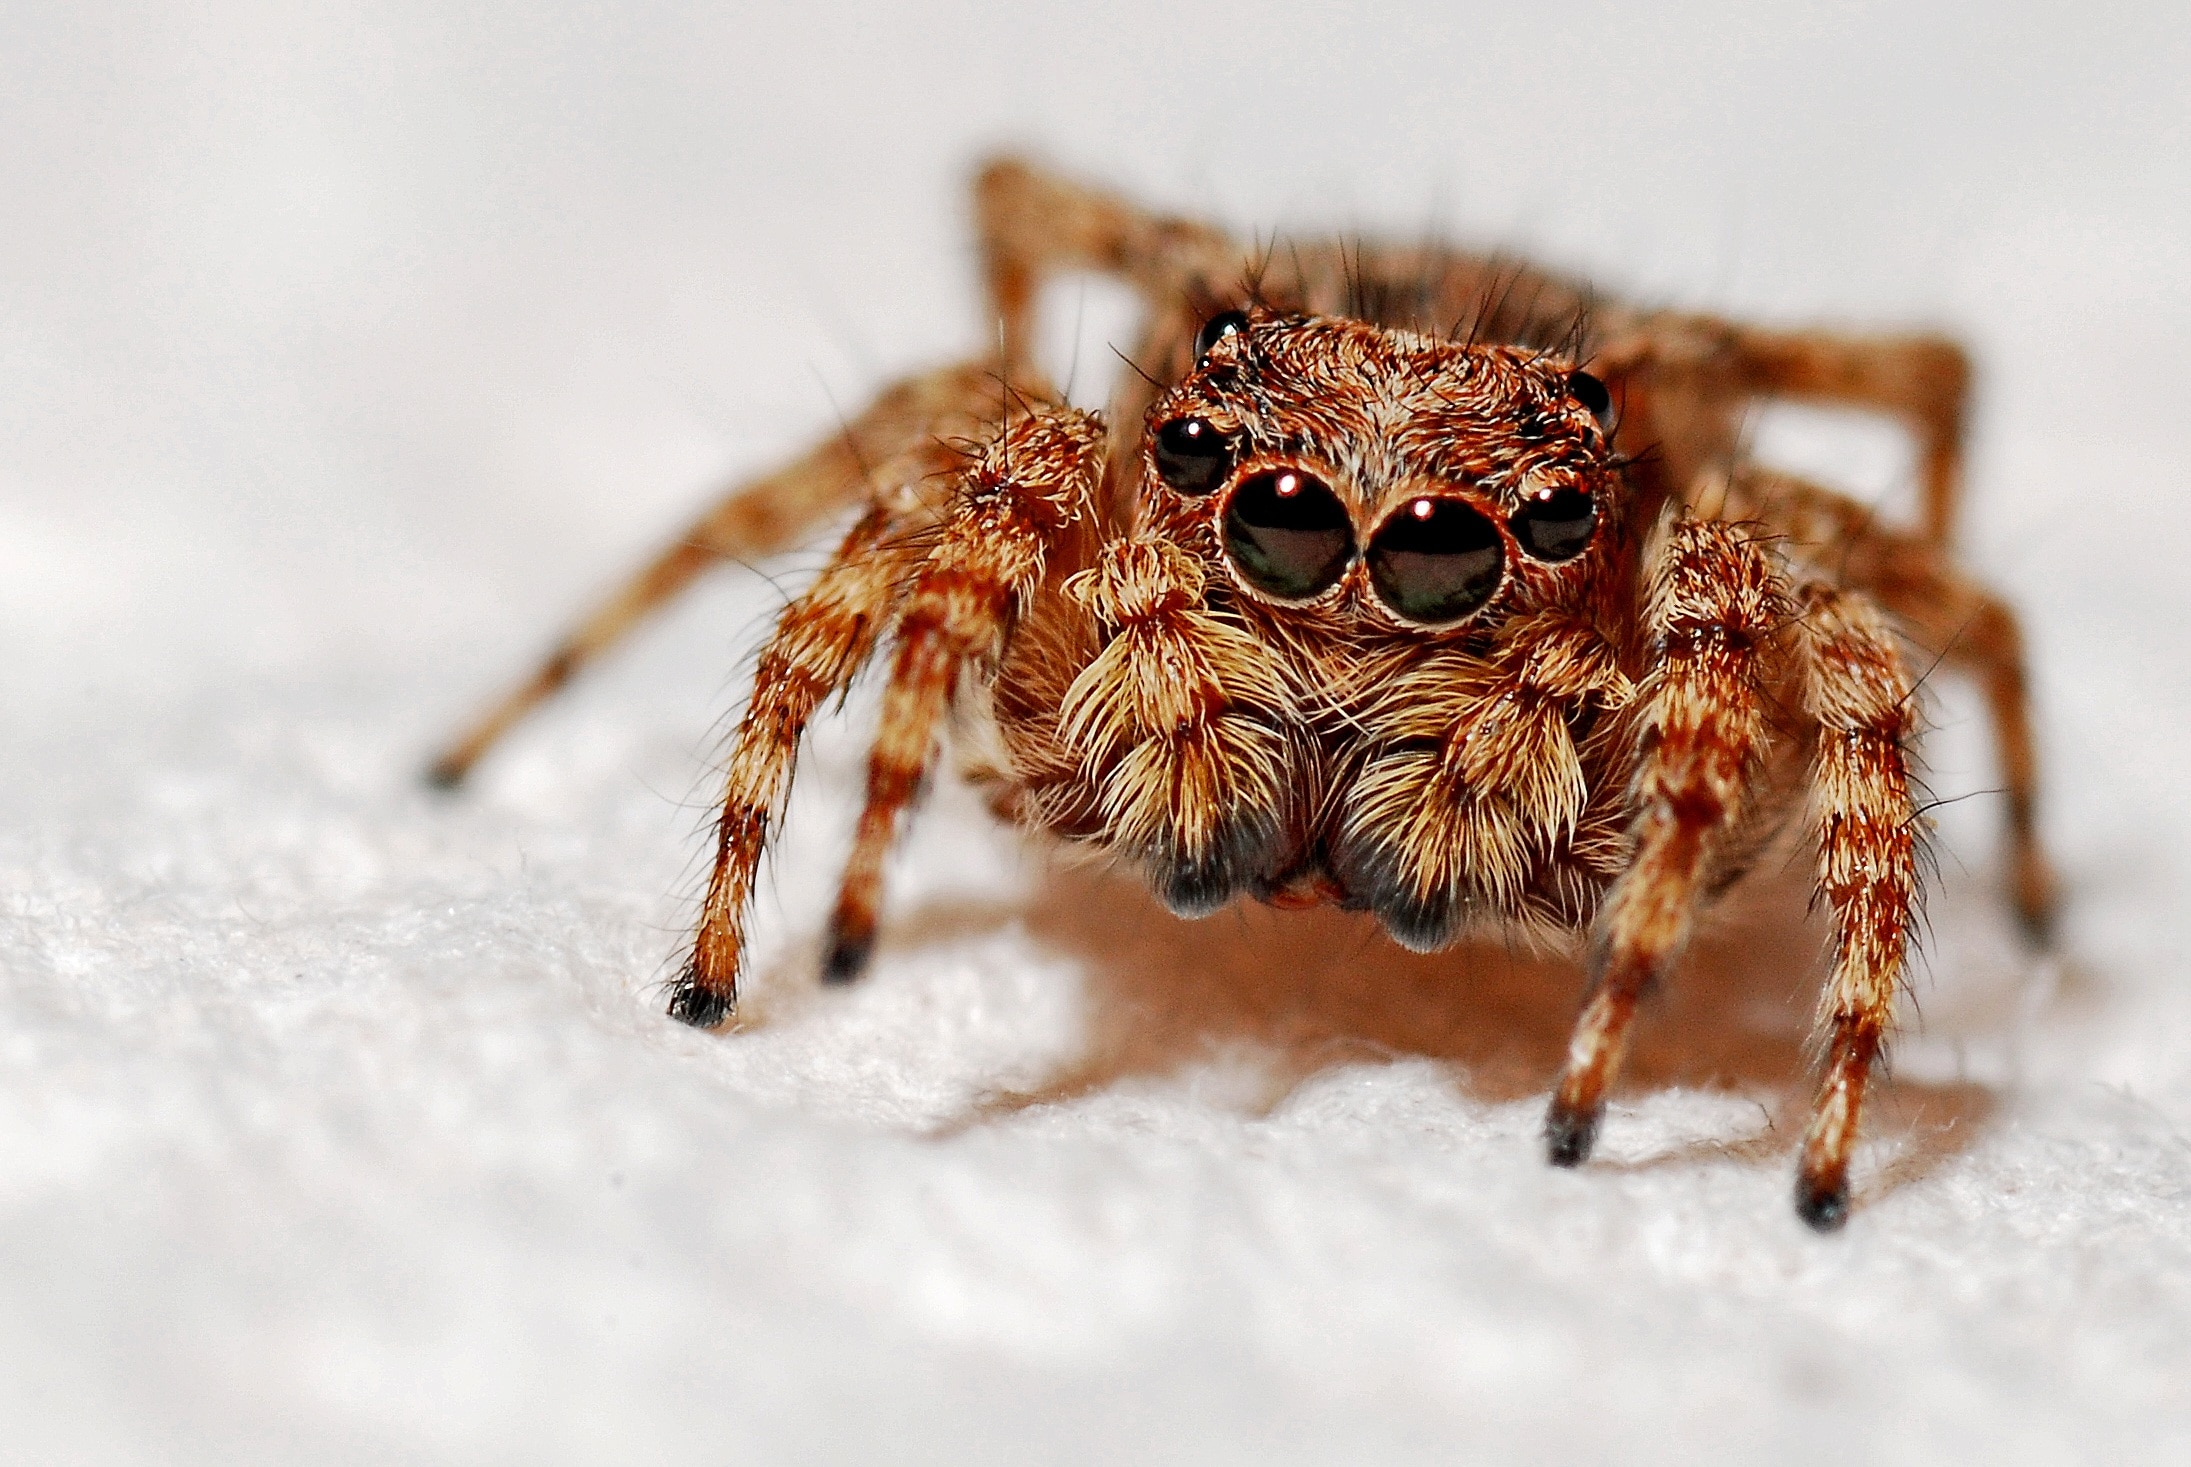 close up photography of brown spider on white surface